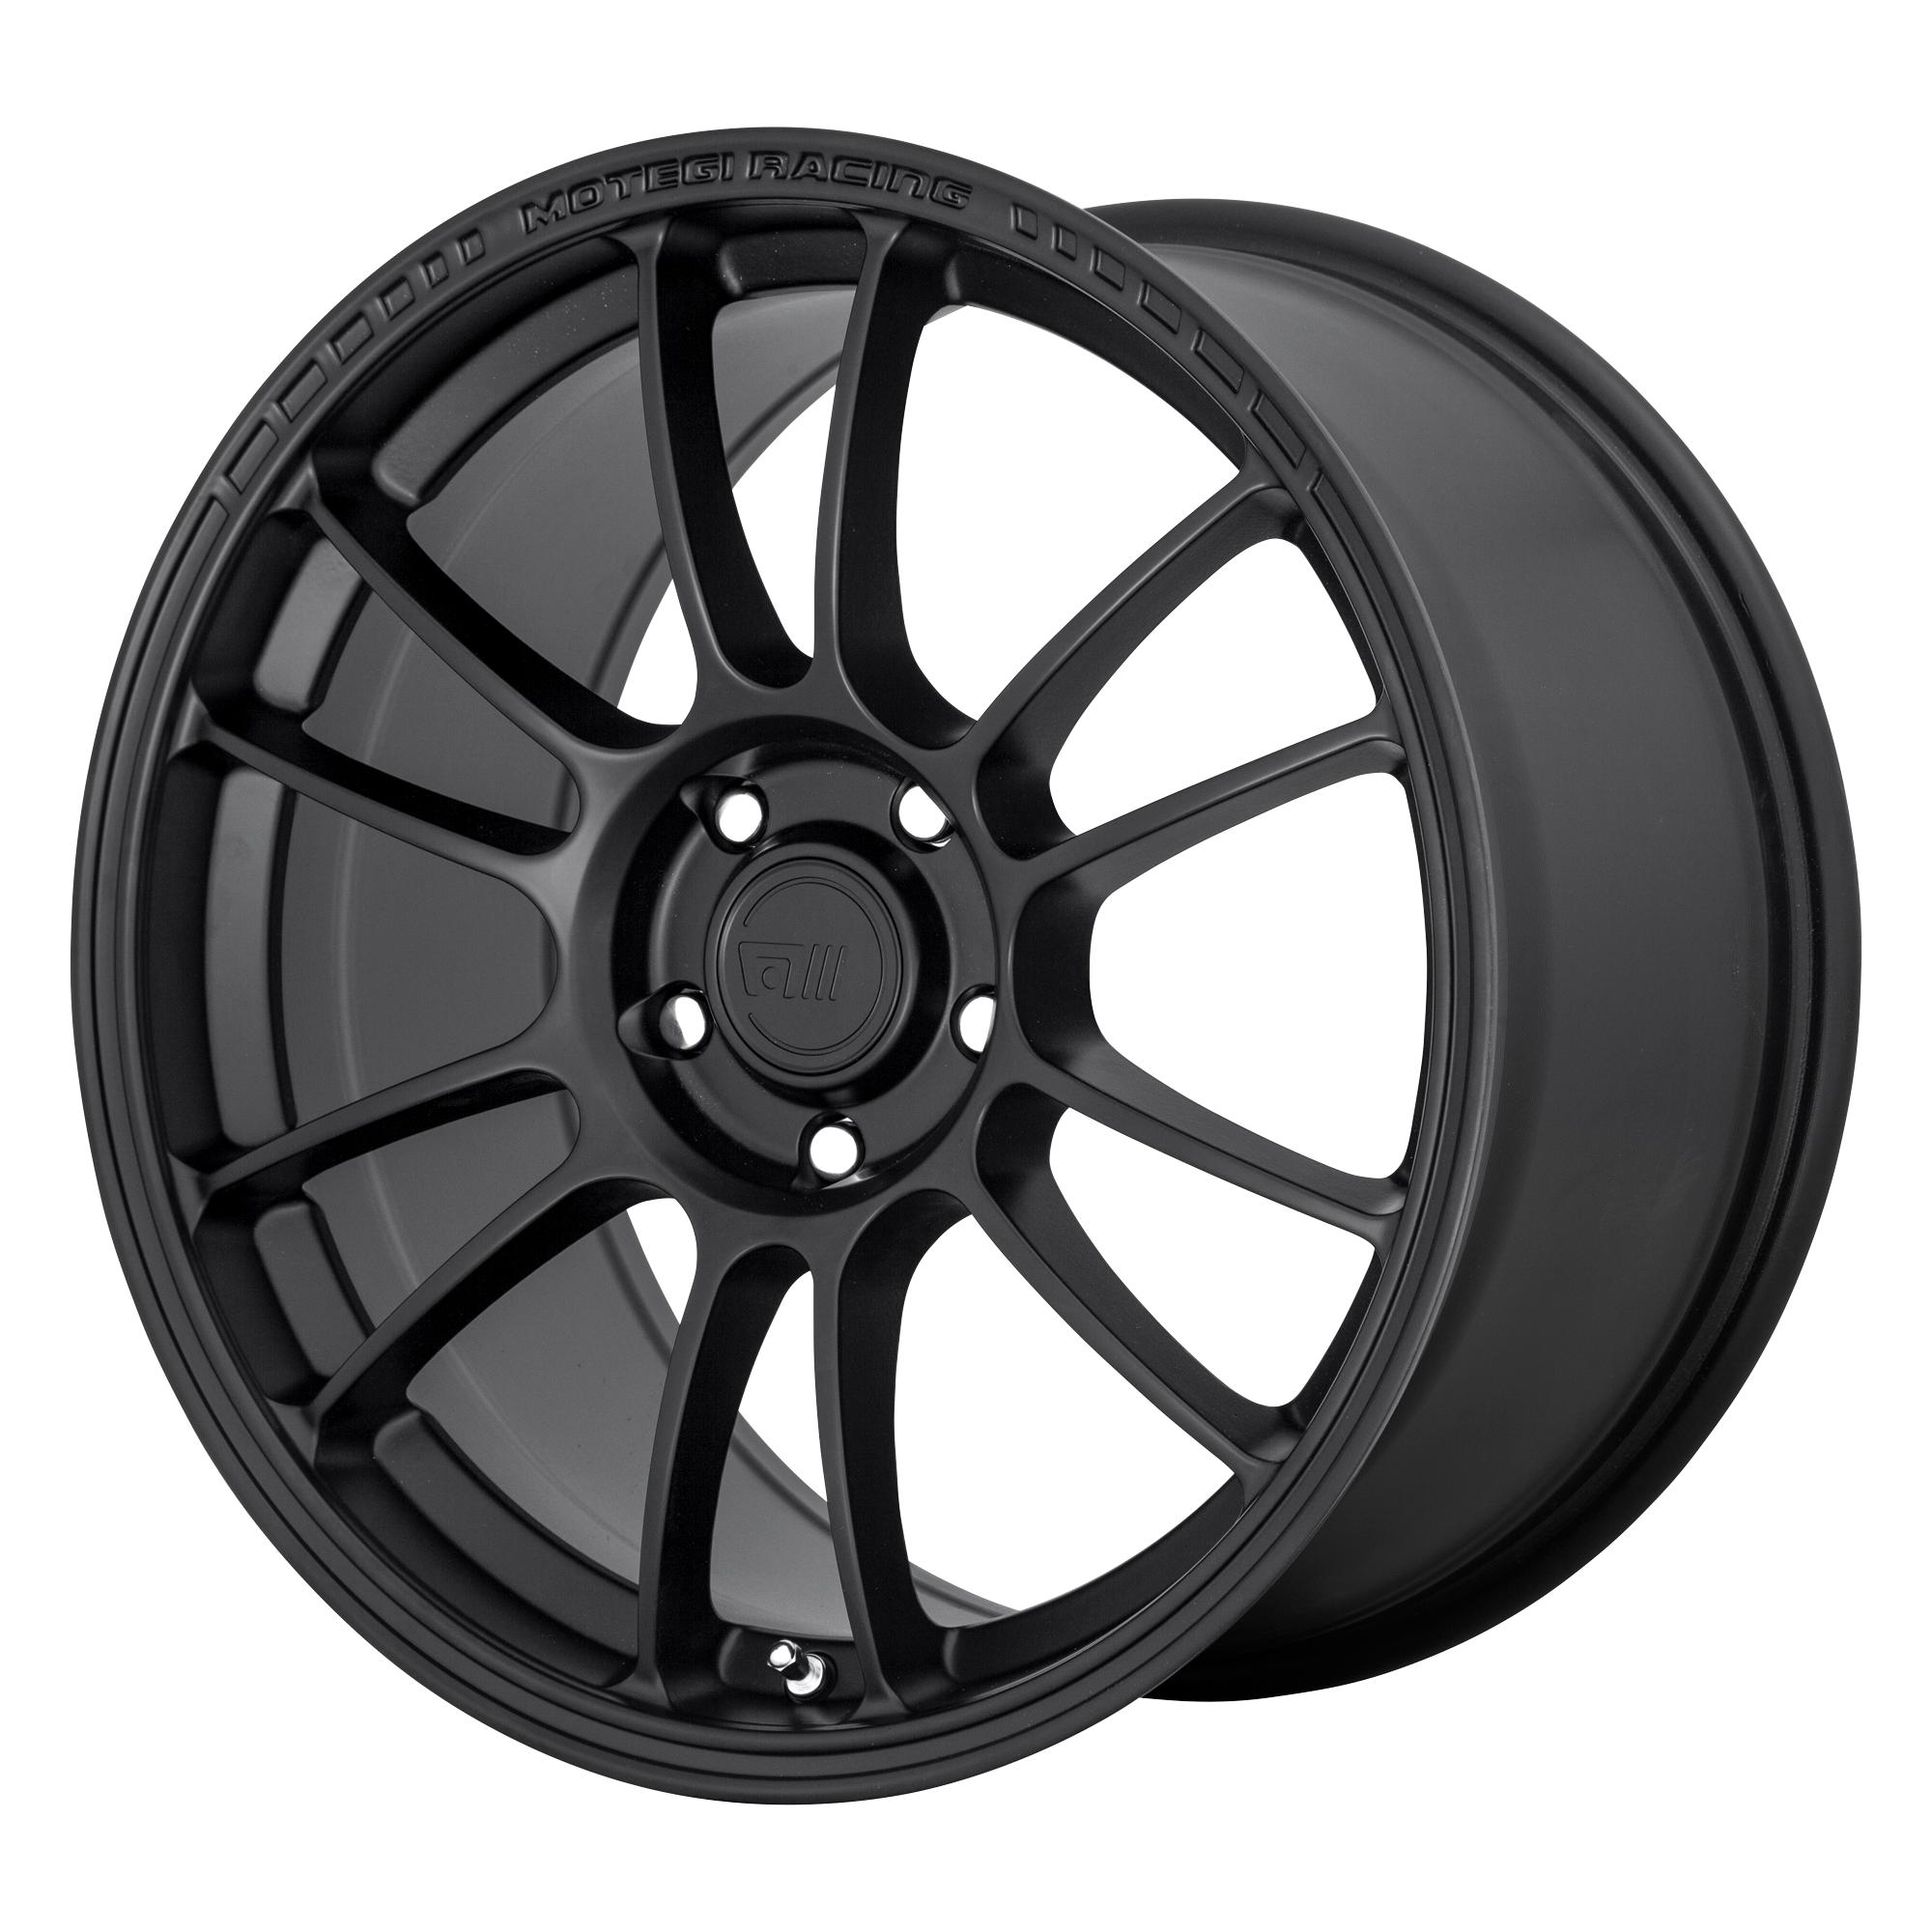 SS6 17x7 5x100.00 SATIN BLACK (42 mm) - Tires and Engine Performance